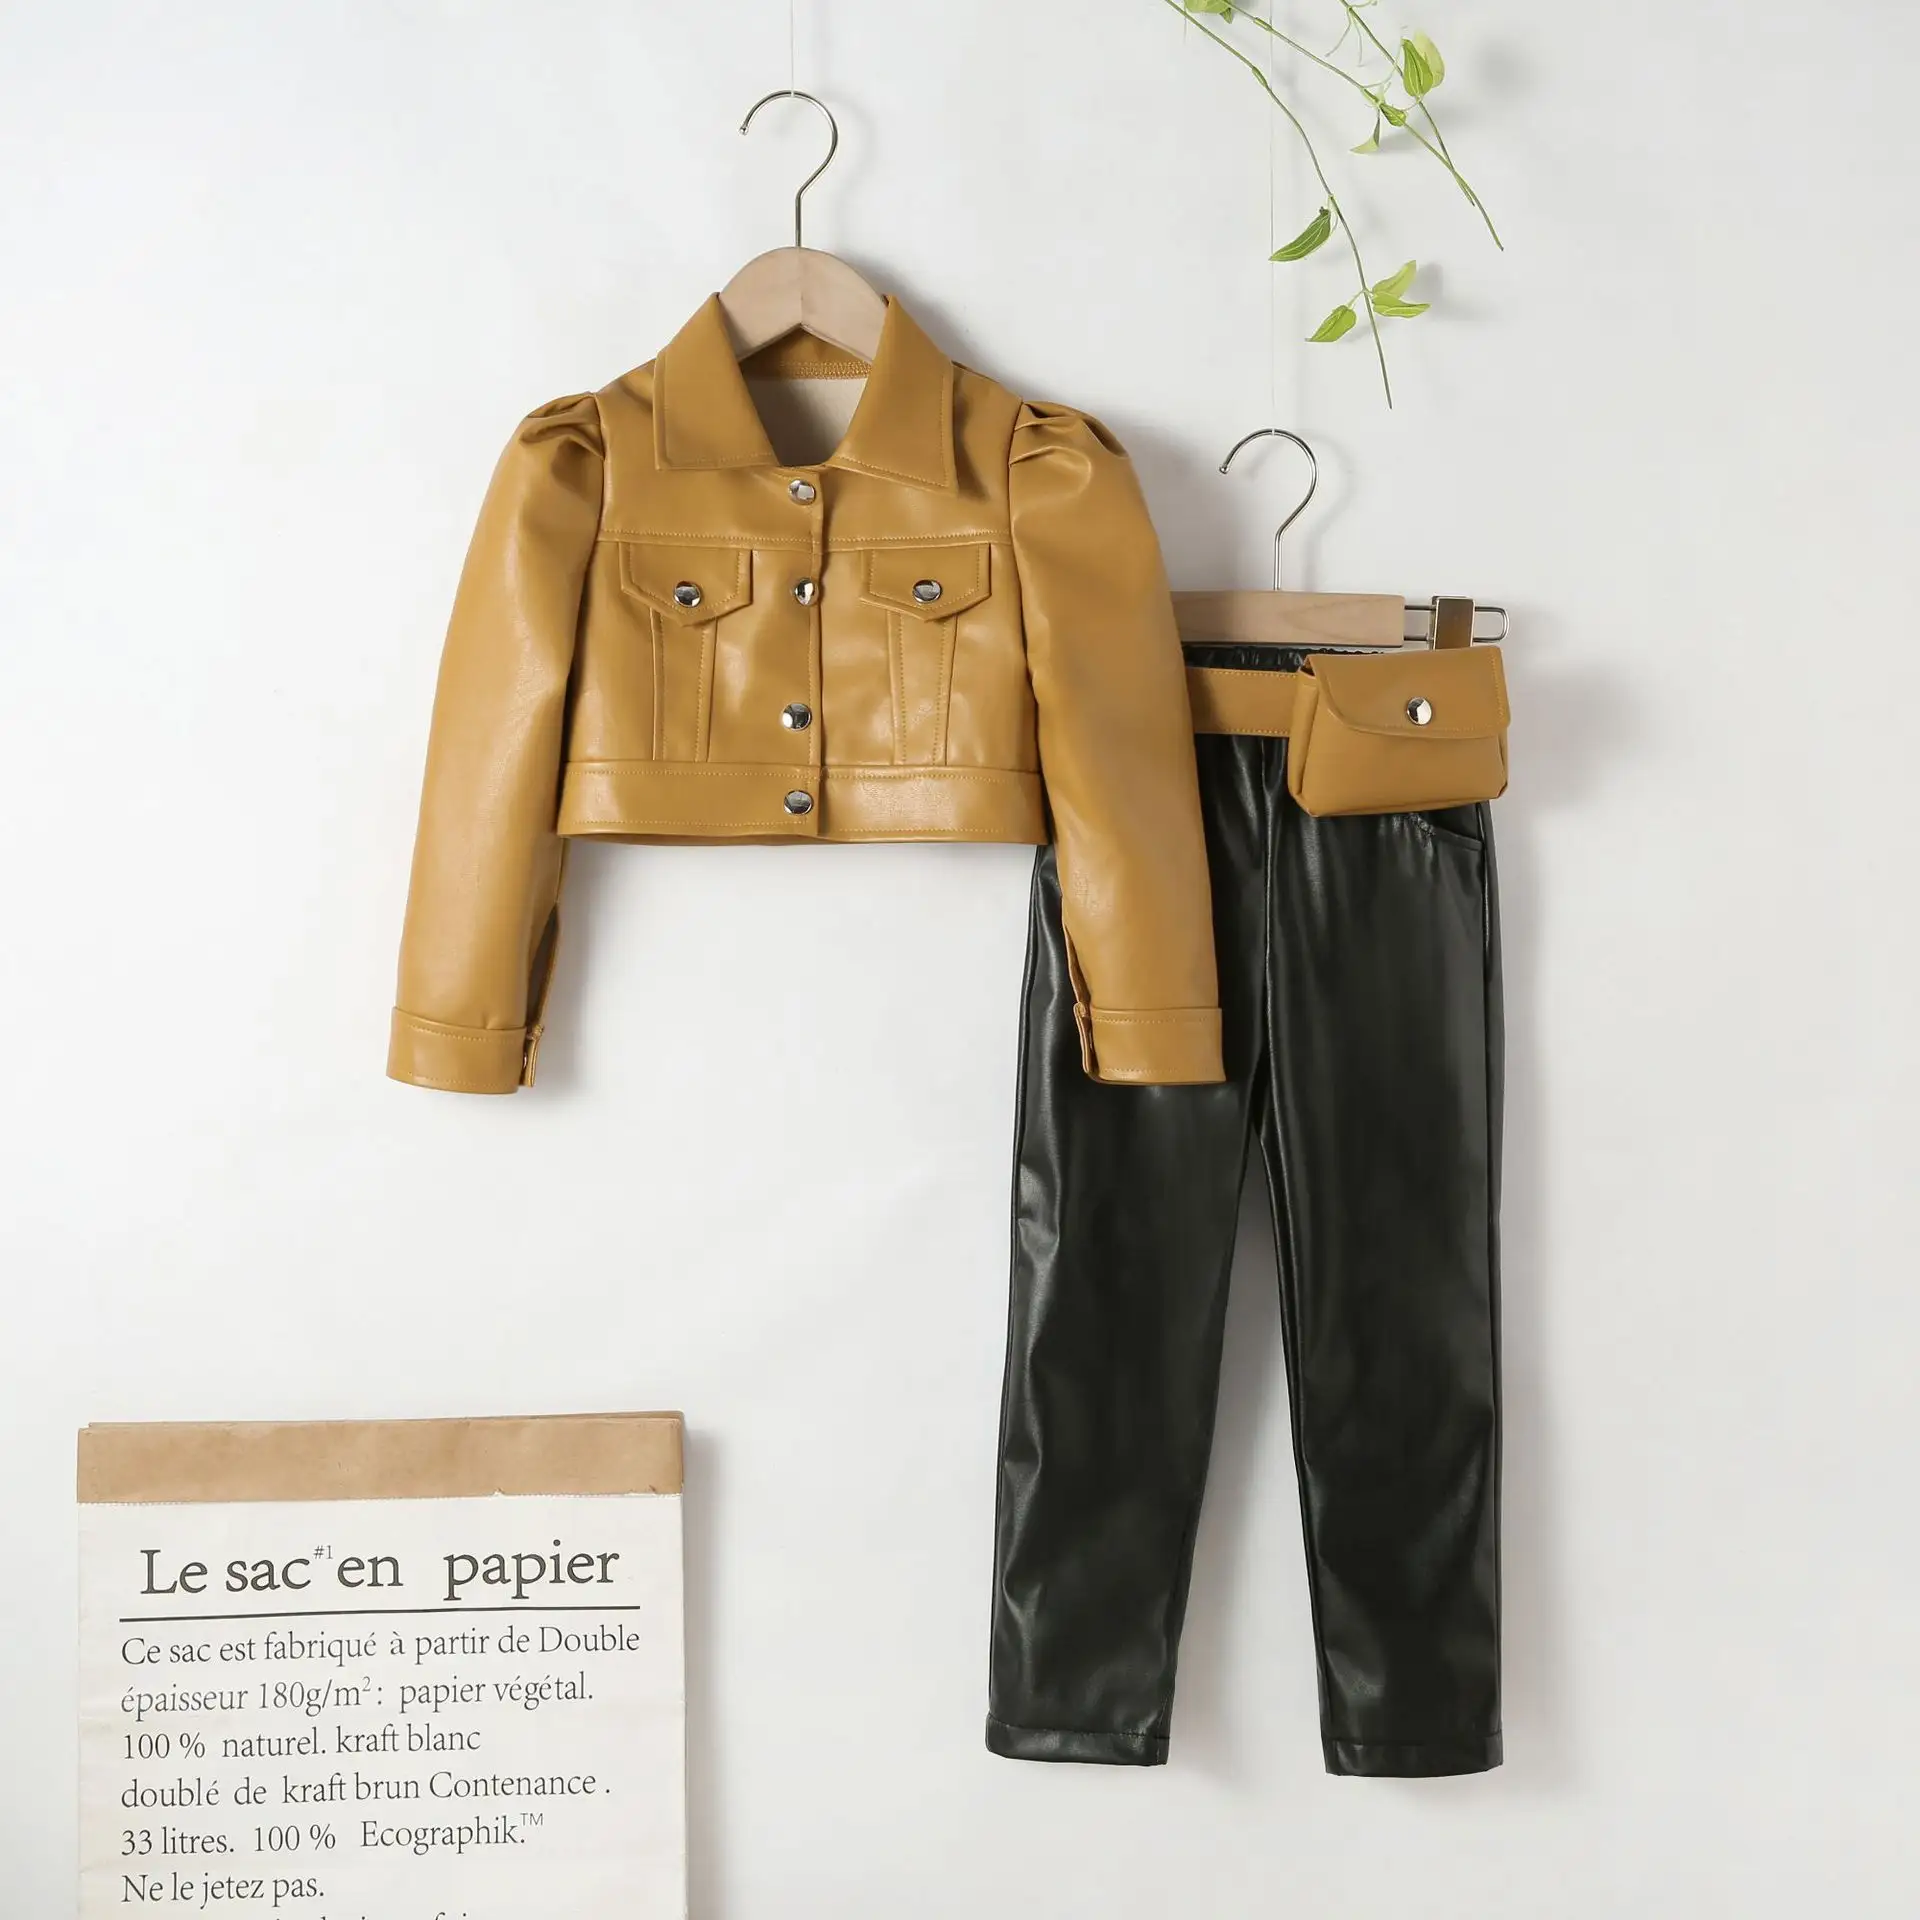 3 Piece /Set New Fashion Girl's Baby Leather PU Bomber Jacket and Harem Pants Suits With Belt